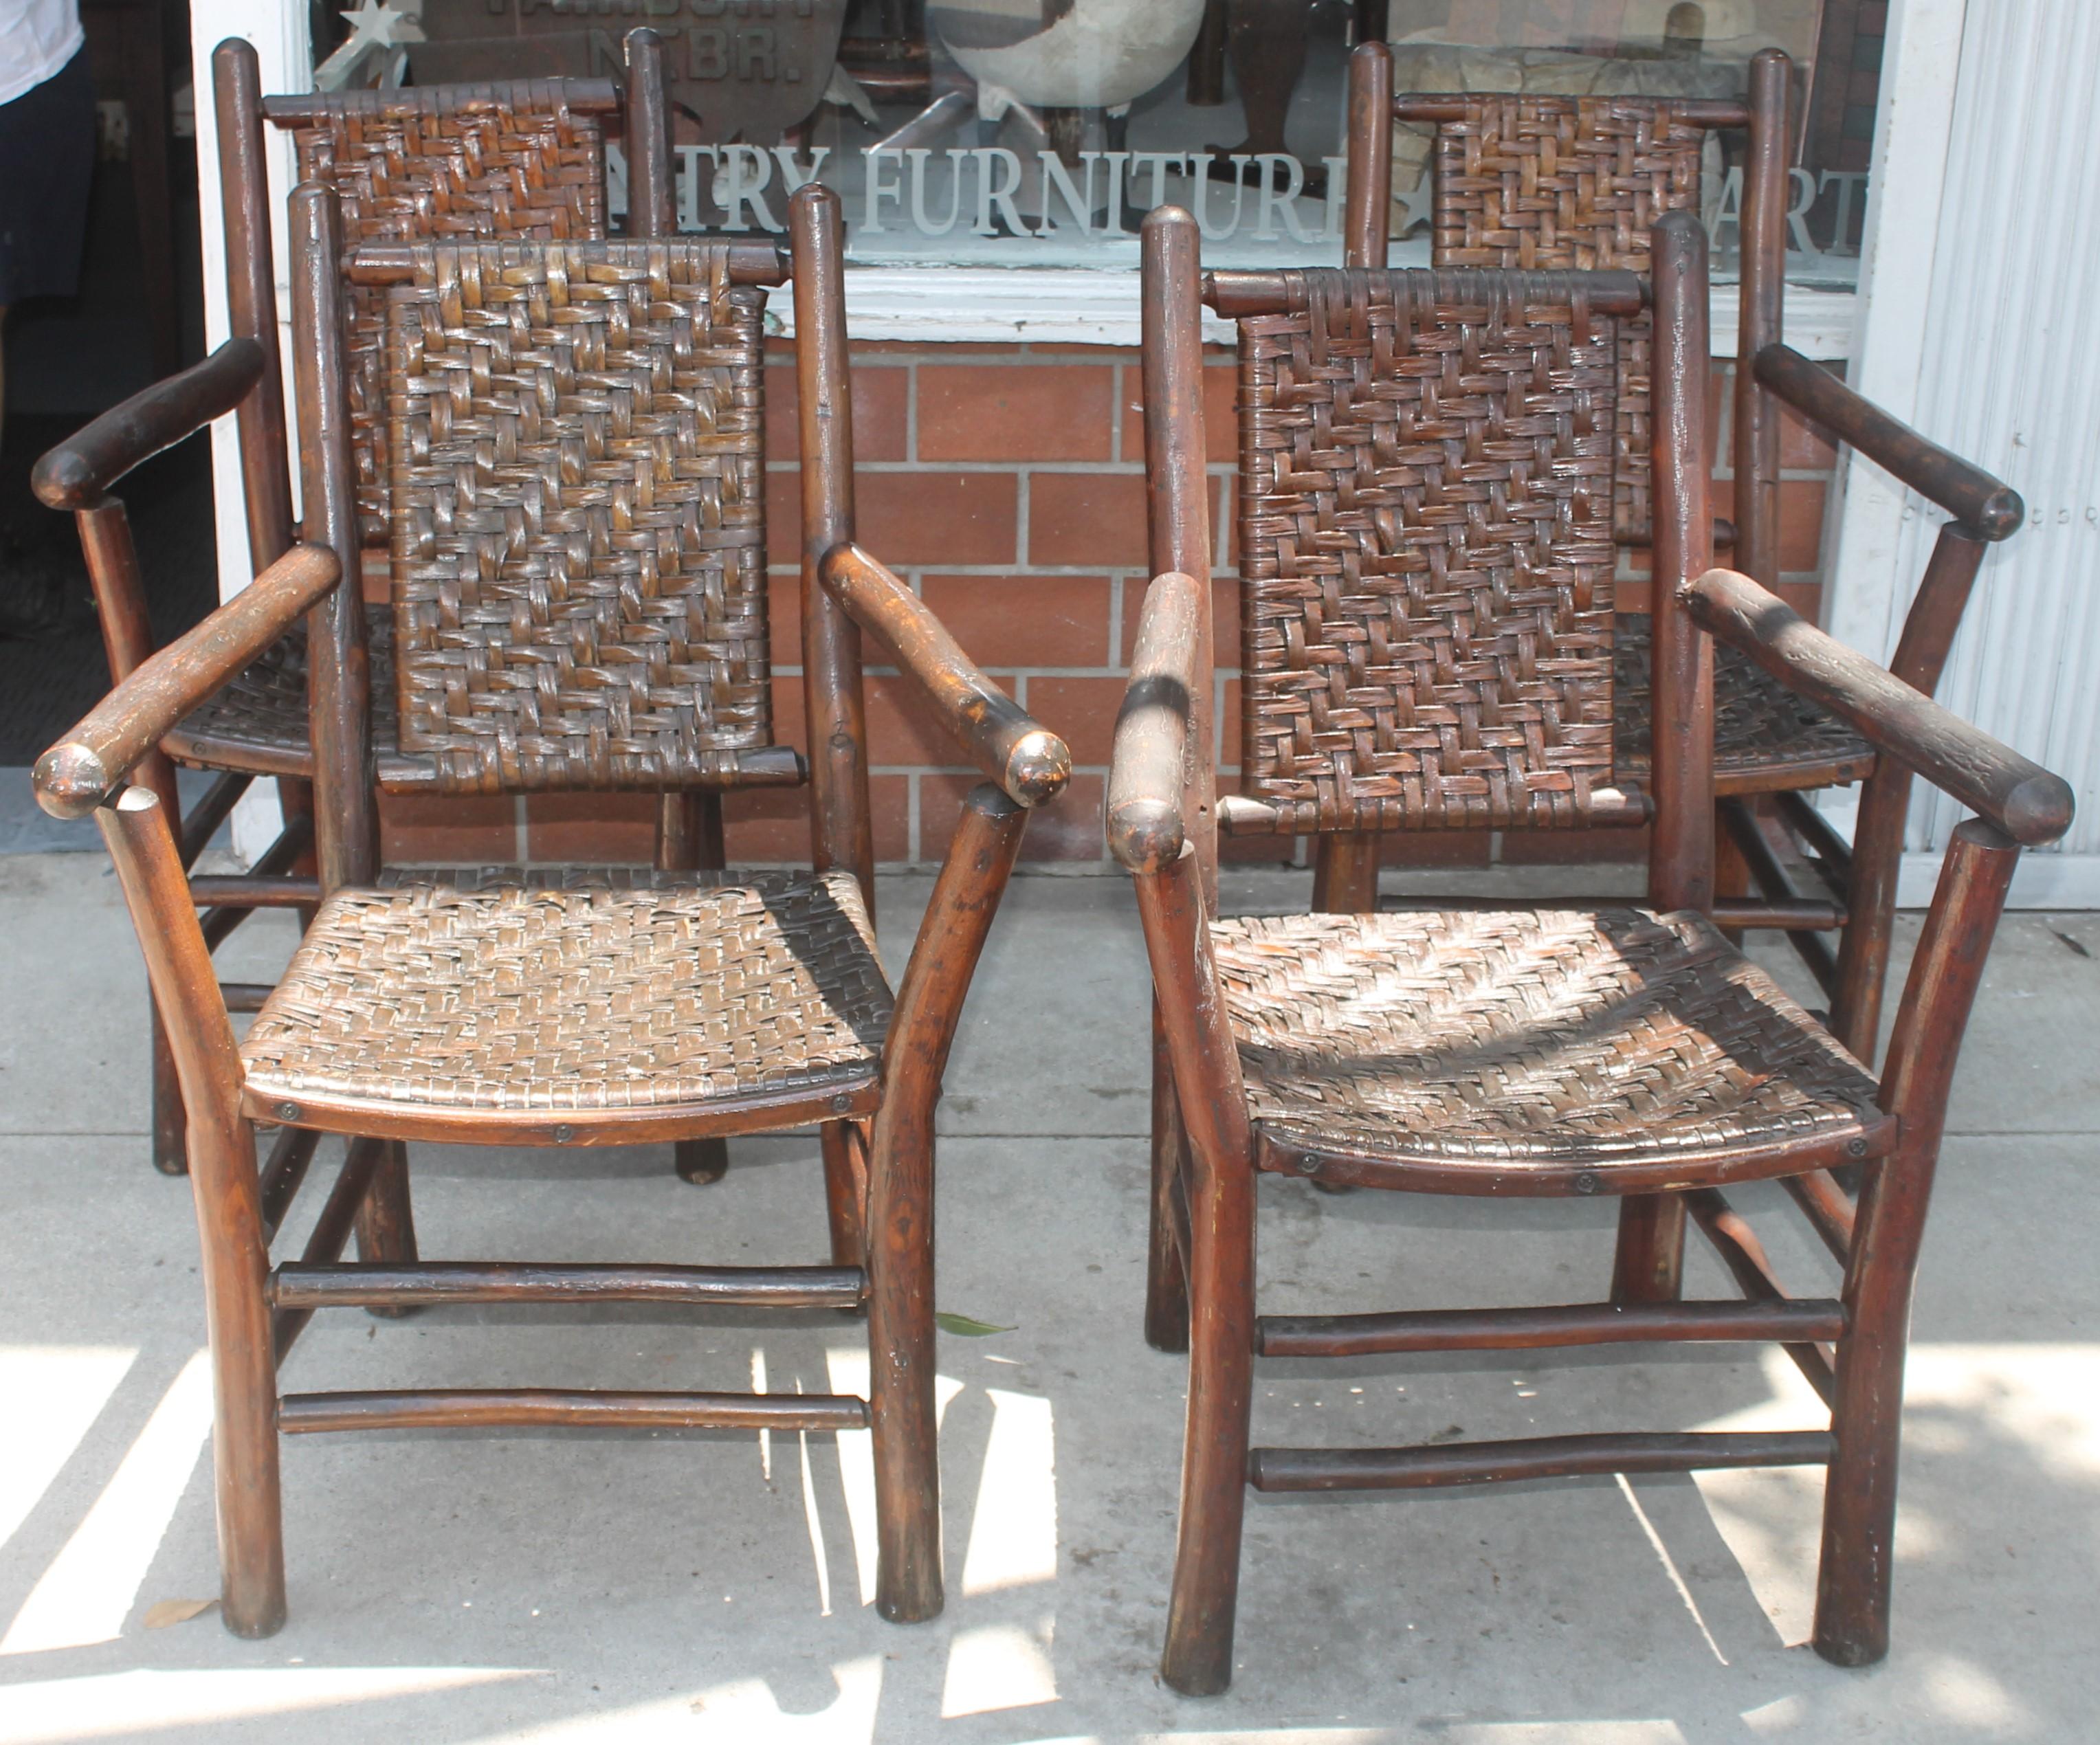 Signed old hickory arm chairs in amazing old surface in fantastic condition. These chairs have such an amazing undisturbed surface and are signed on the lower back legs: Old Hickory Furniture Company, Martinsville, Indiana. Some have the little